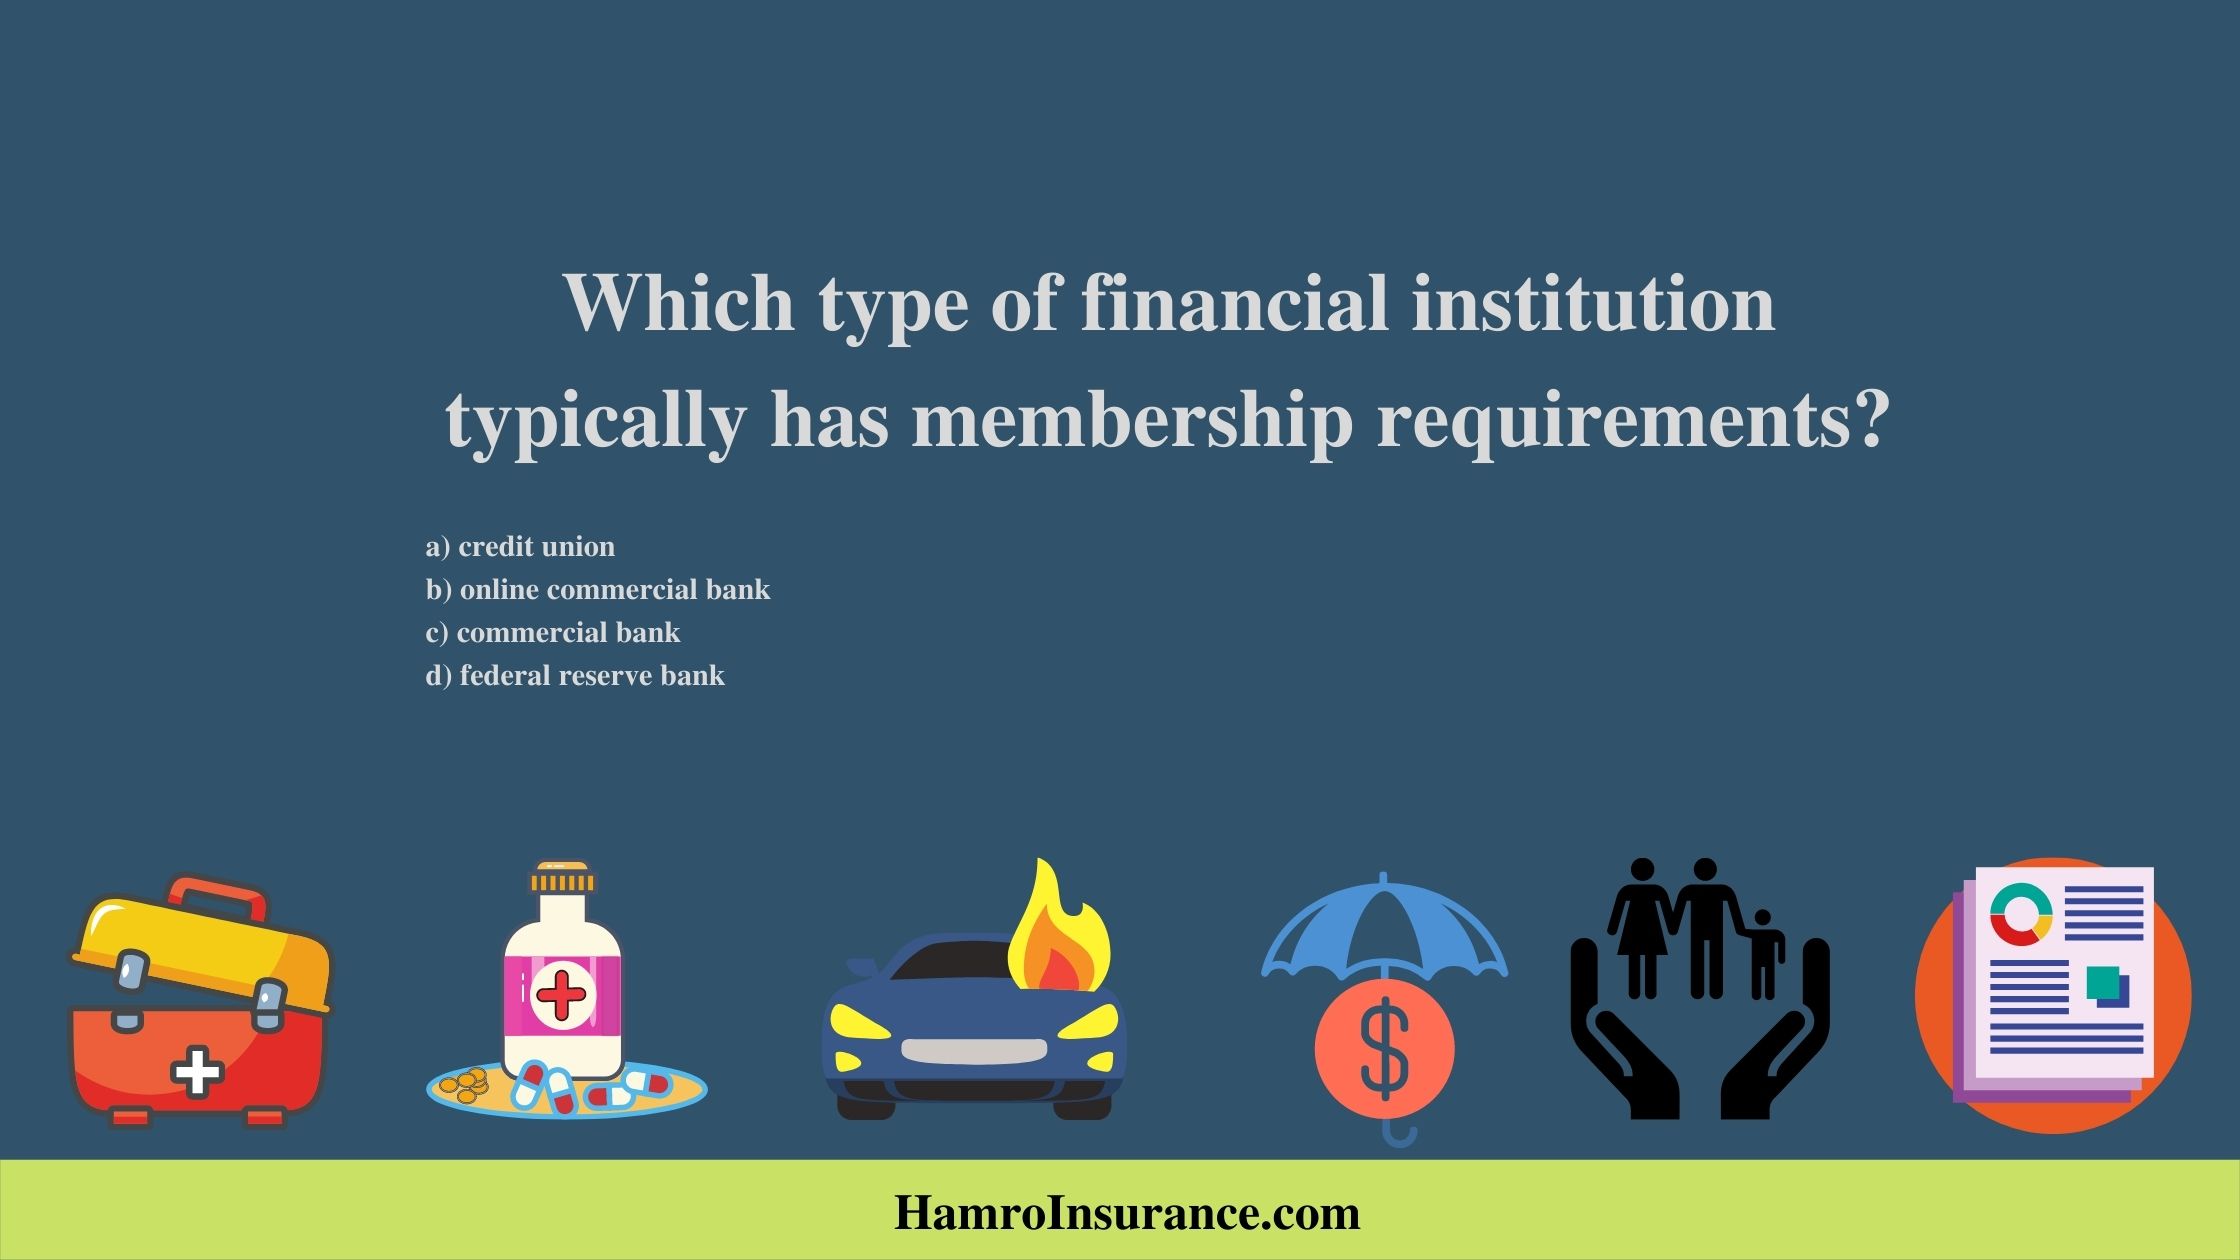 Which type of financial institution typically has membership requirements?